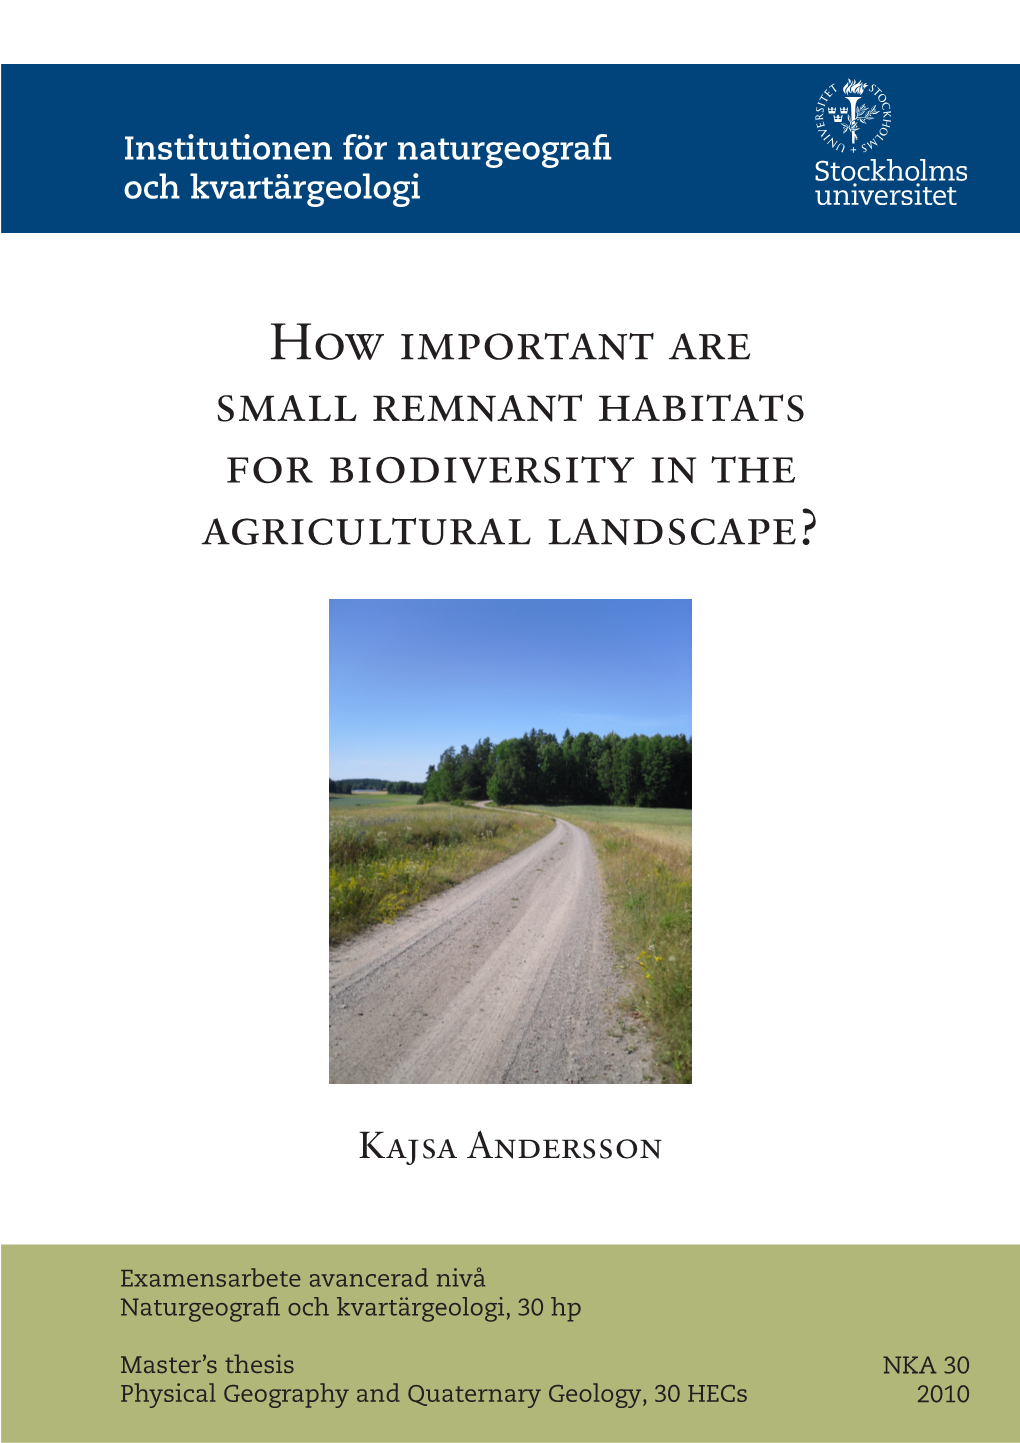 How Important Are Small Remnant Habitats for Biodiversity in the Agricultural Landscape?